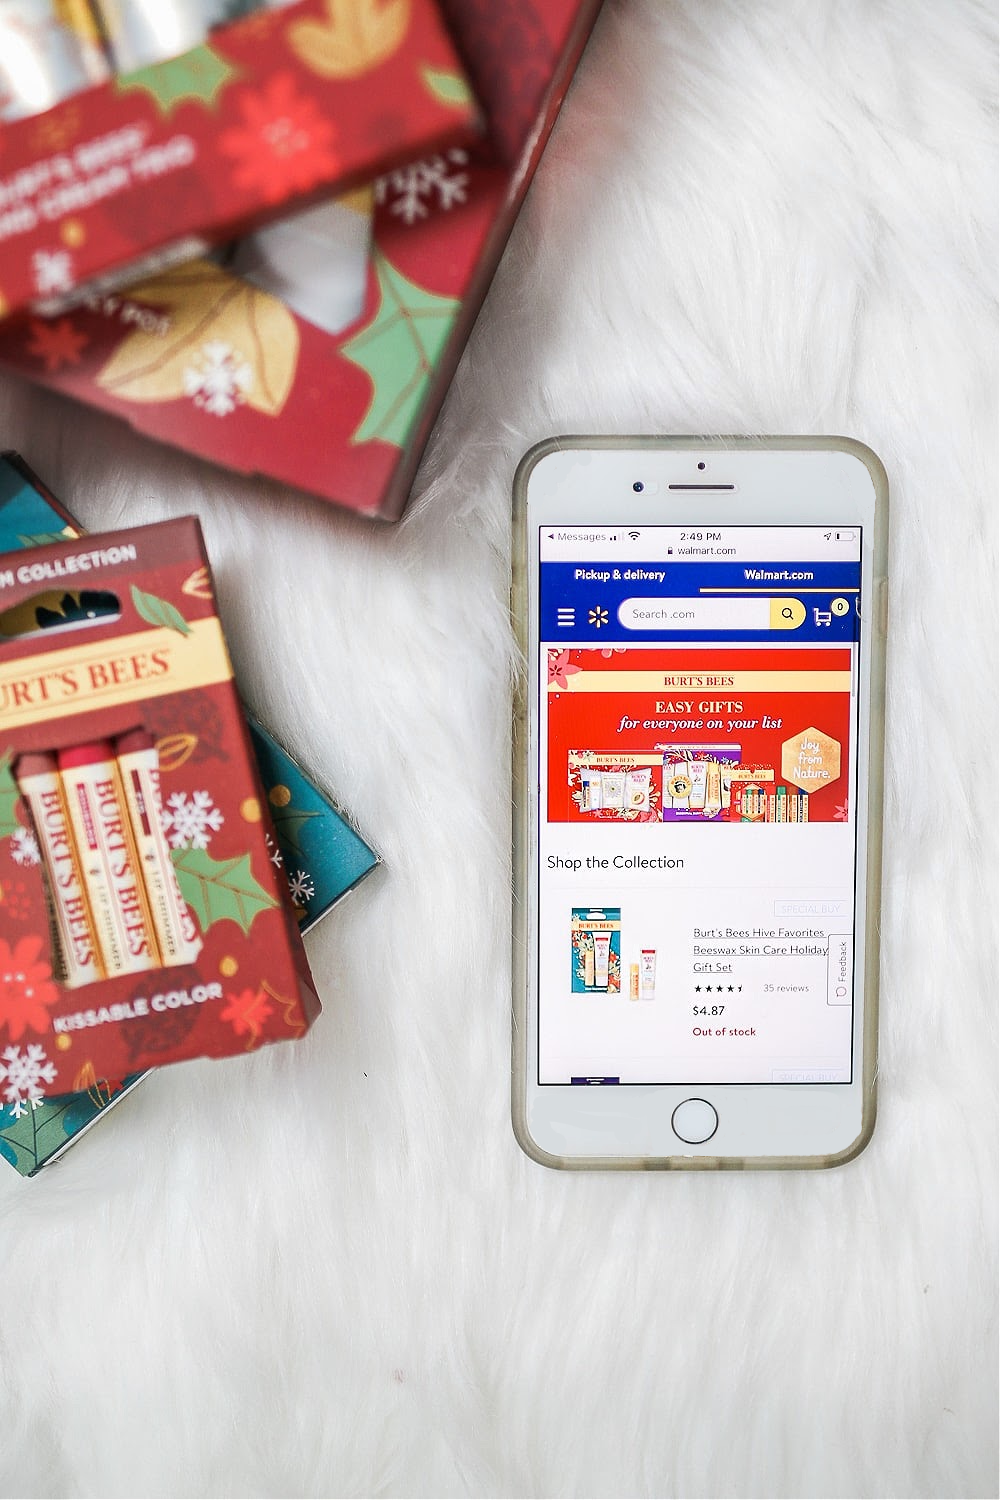 Blogger Stephanie Ziajka shows how to use the Walmart app to shop Burt's Bees gift sets and get free shipping on Diary of a Debutante